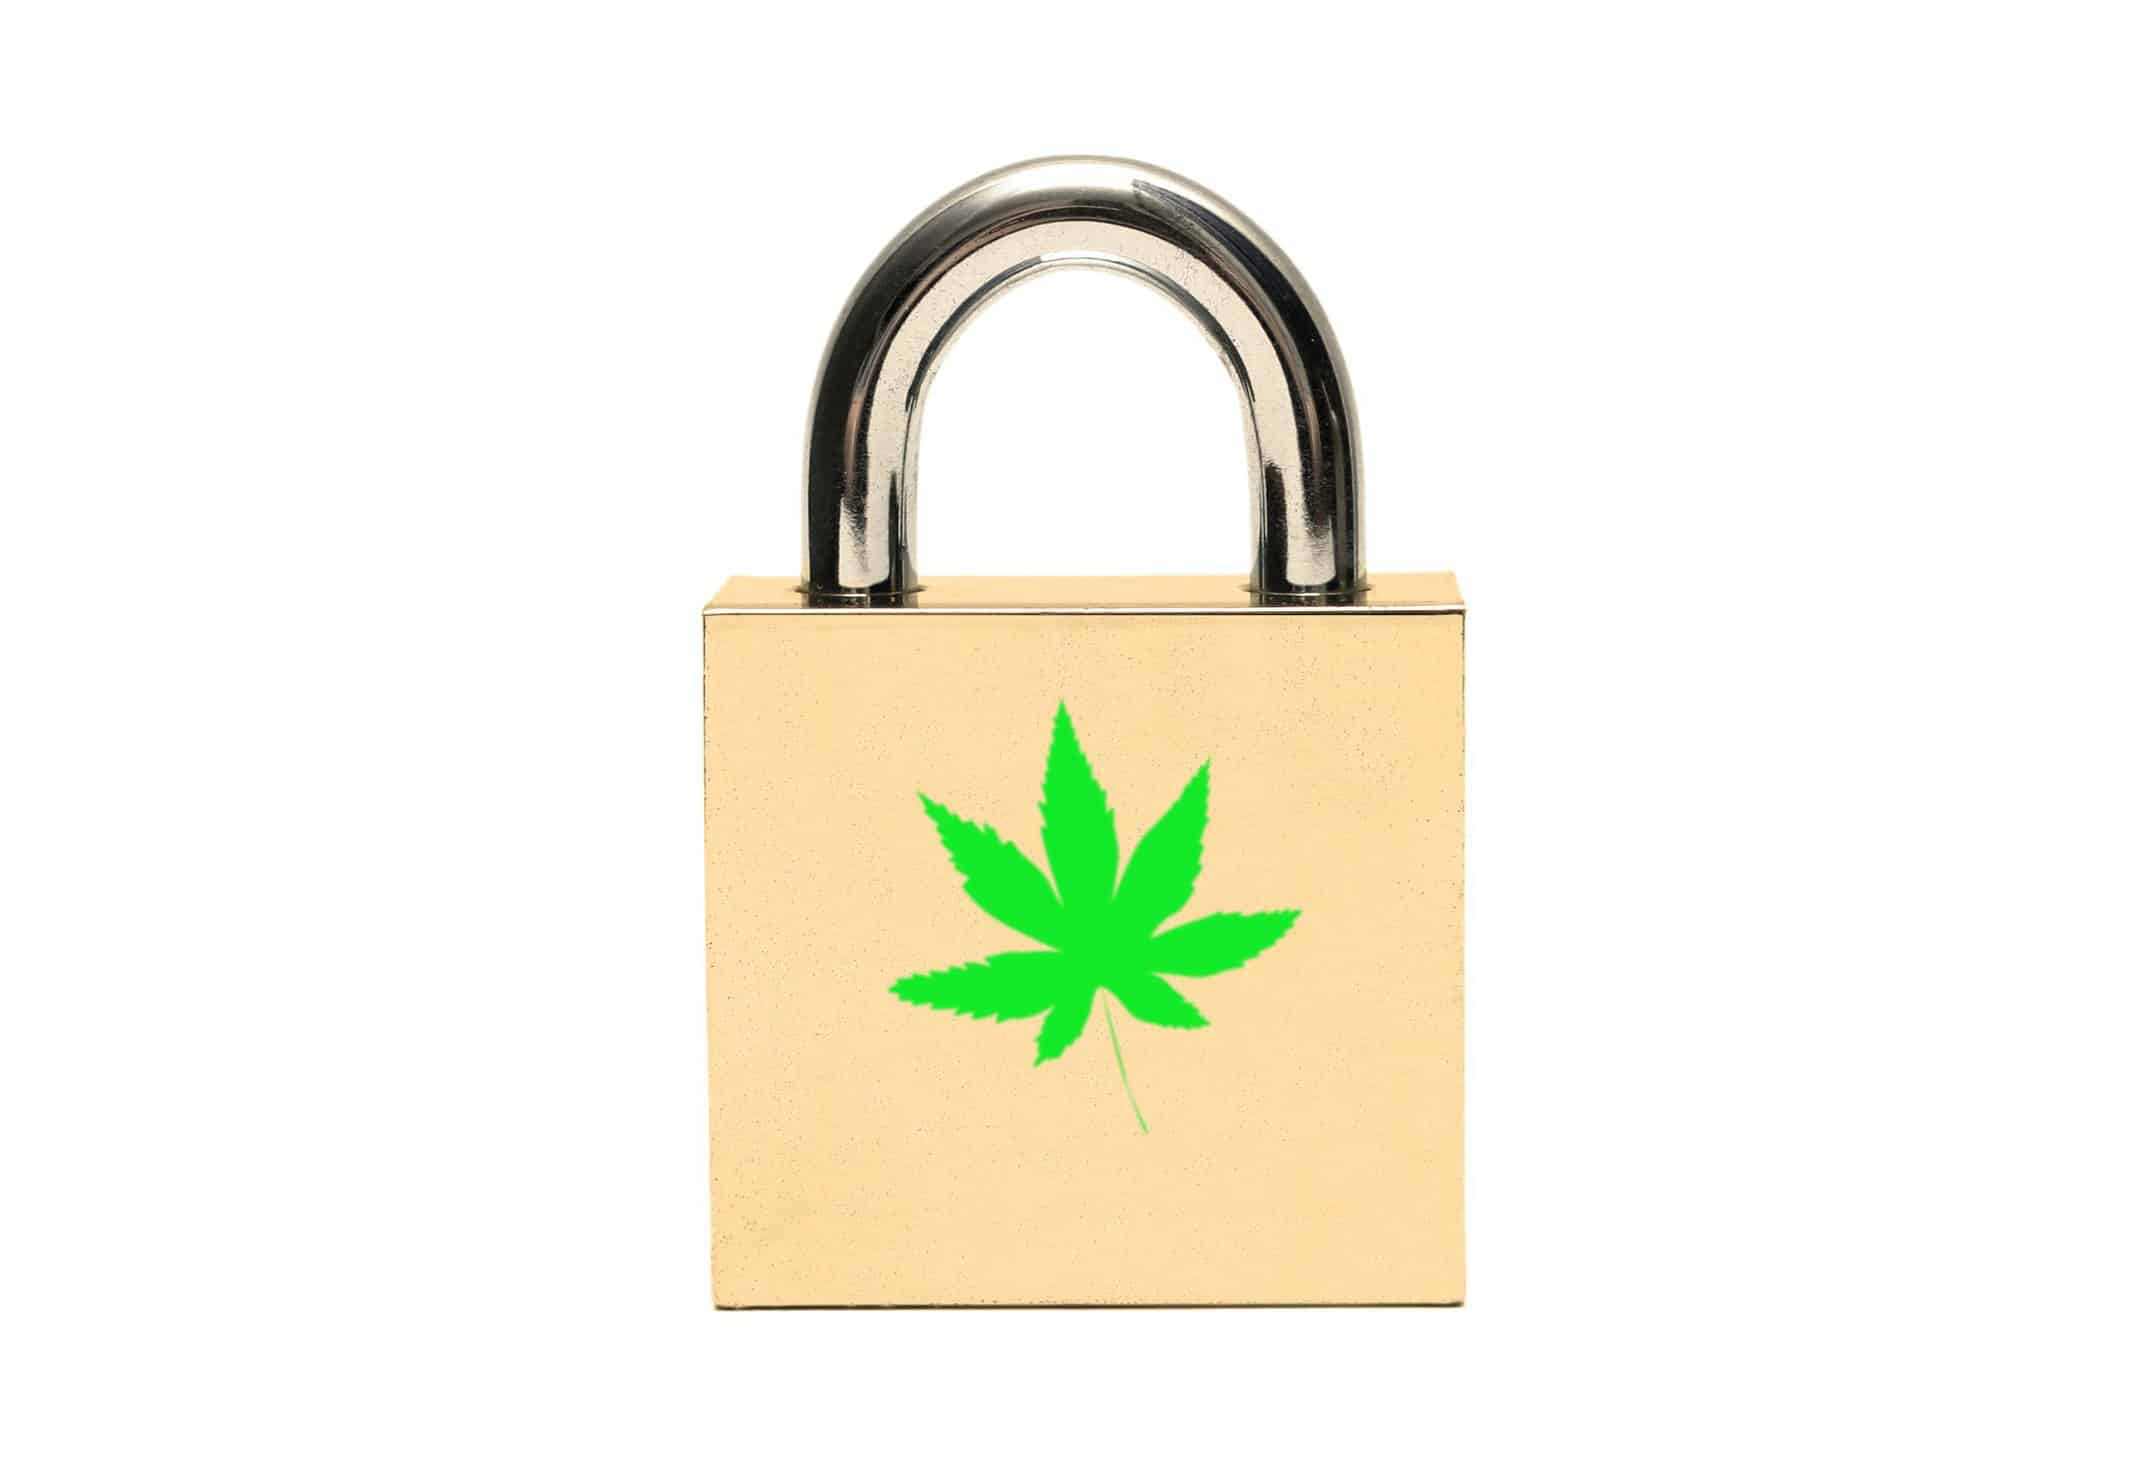 Keypad lock with marijuana leaf, Could cannabis prohibition come back to legal states